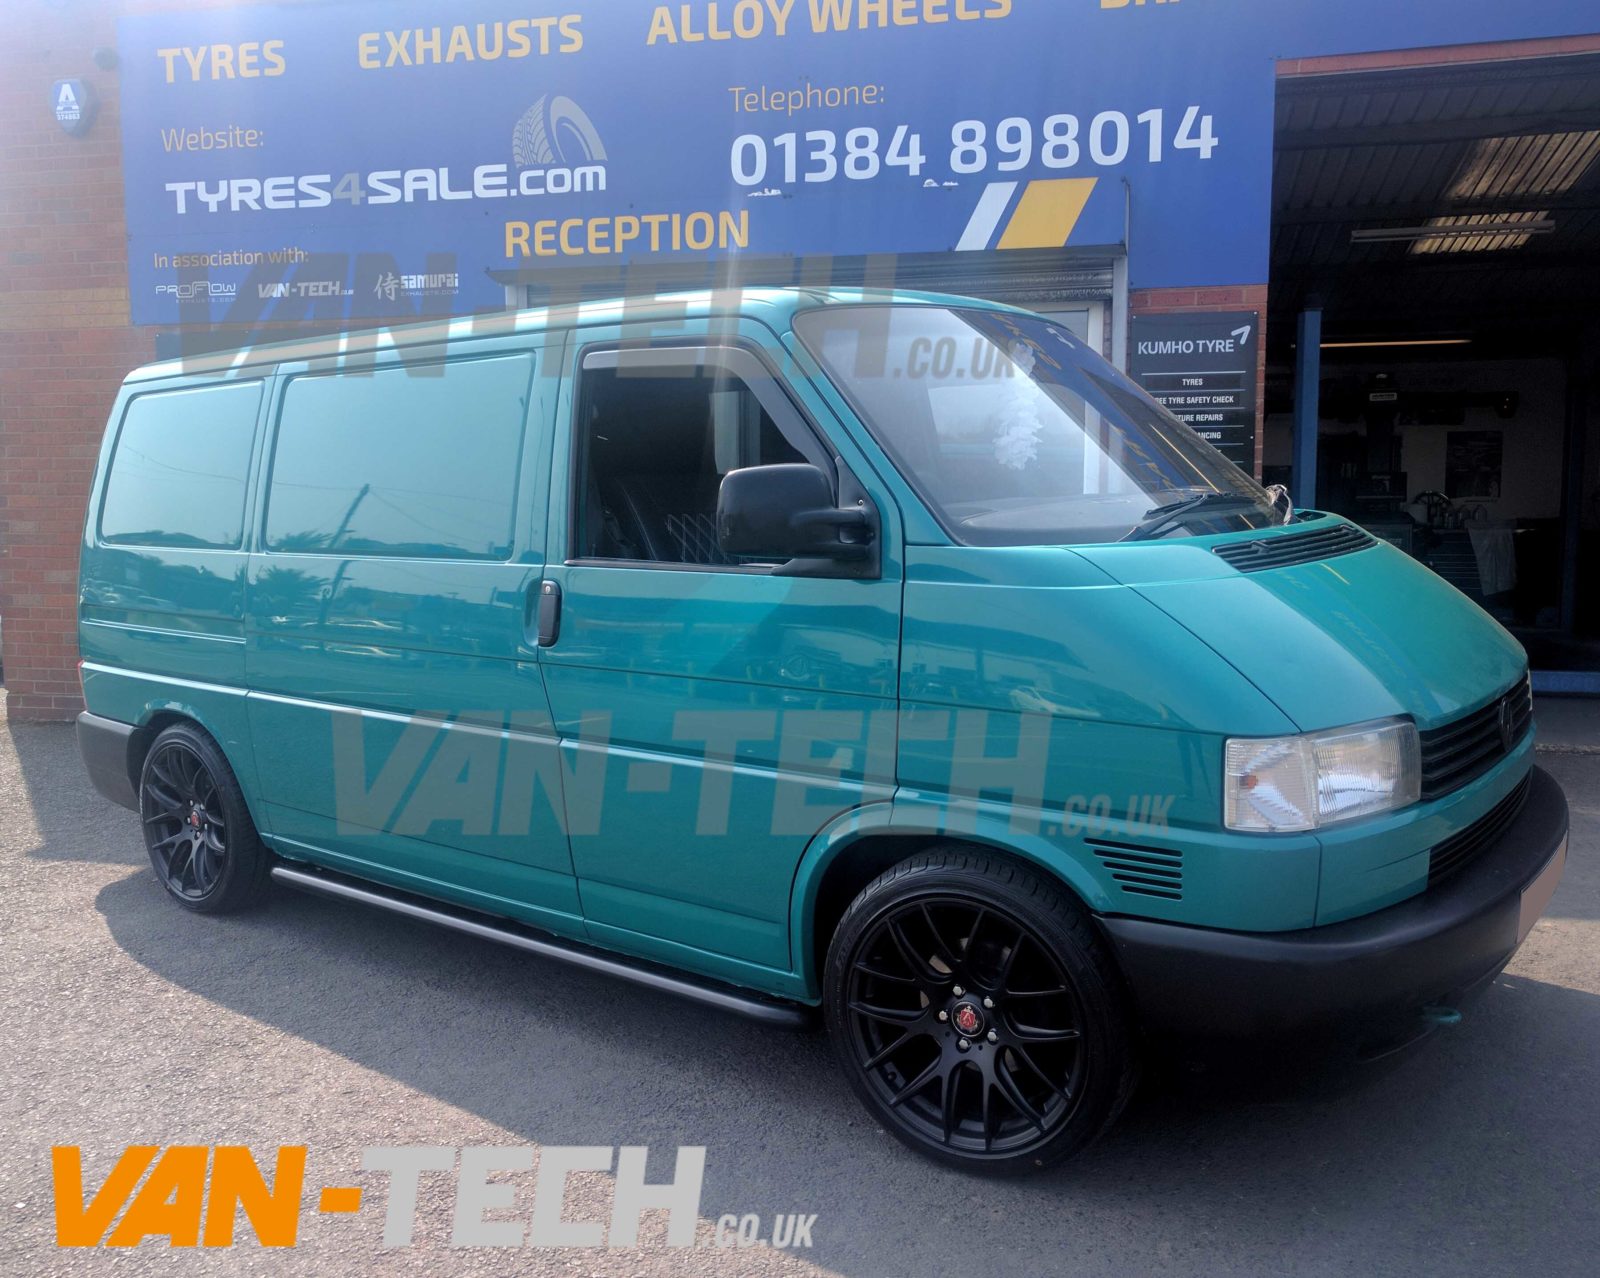 VW Transporter T4 with Alloy and Side | Van-Tech